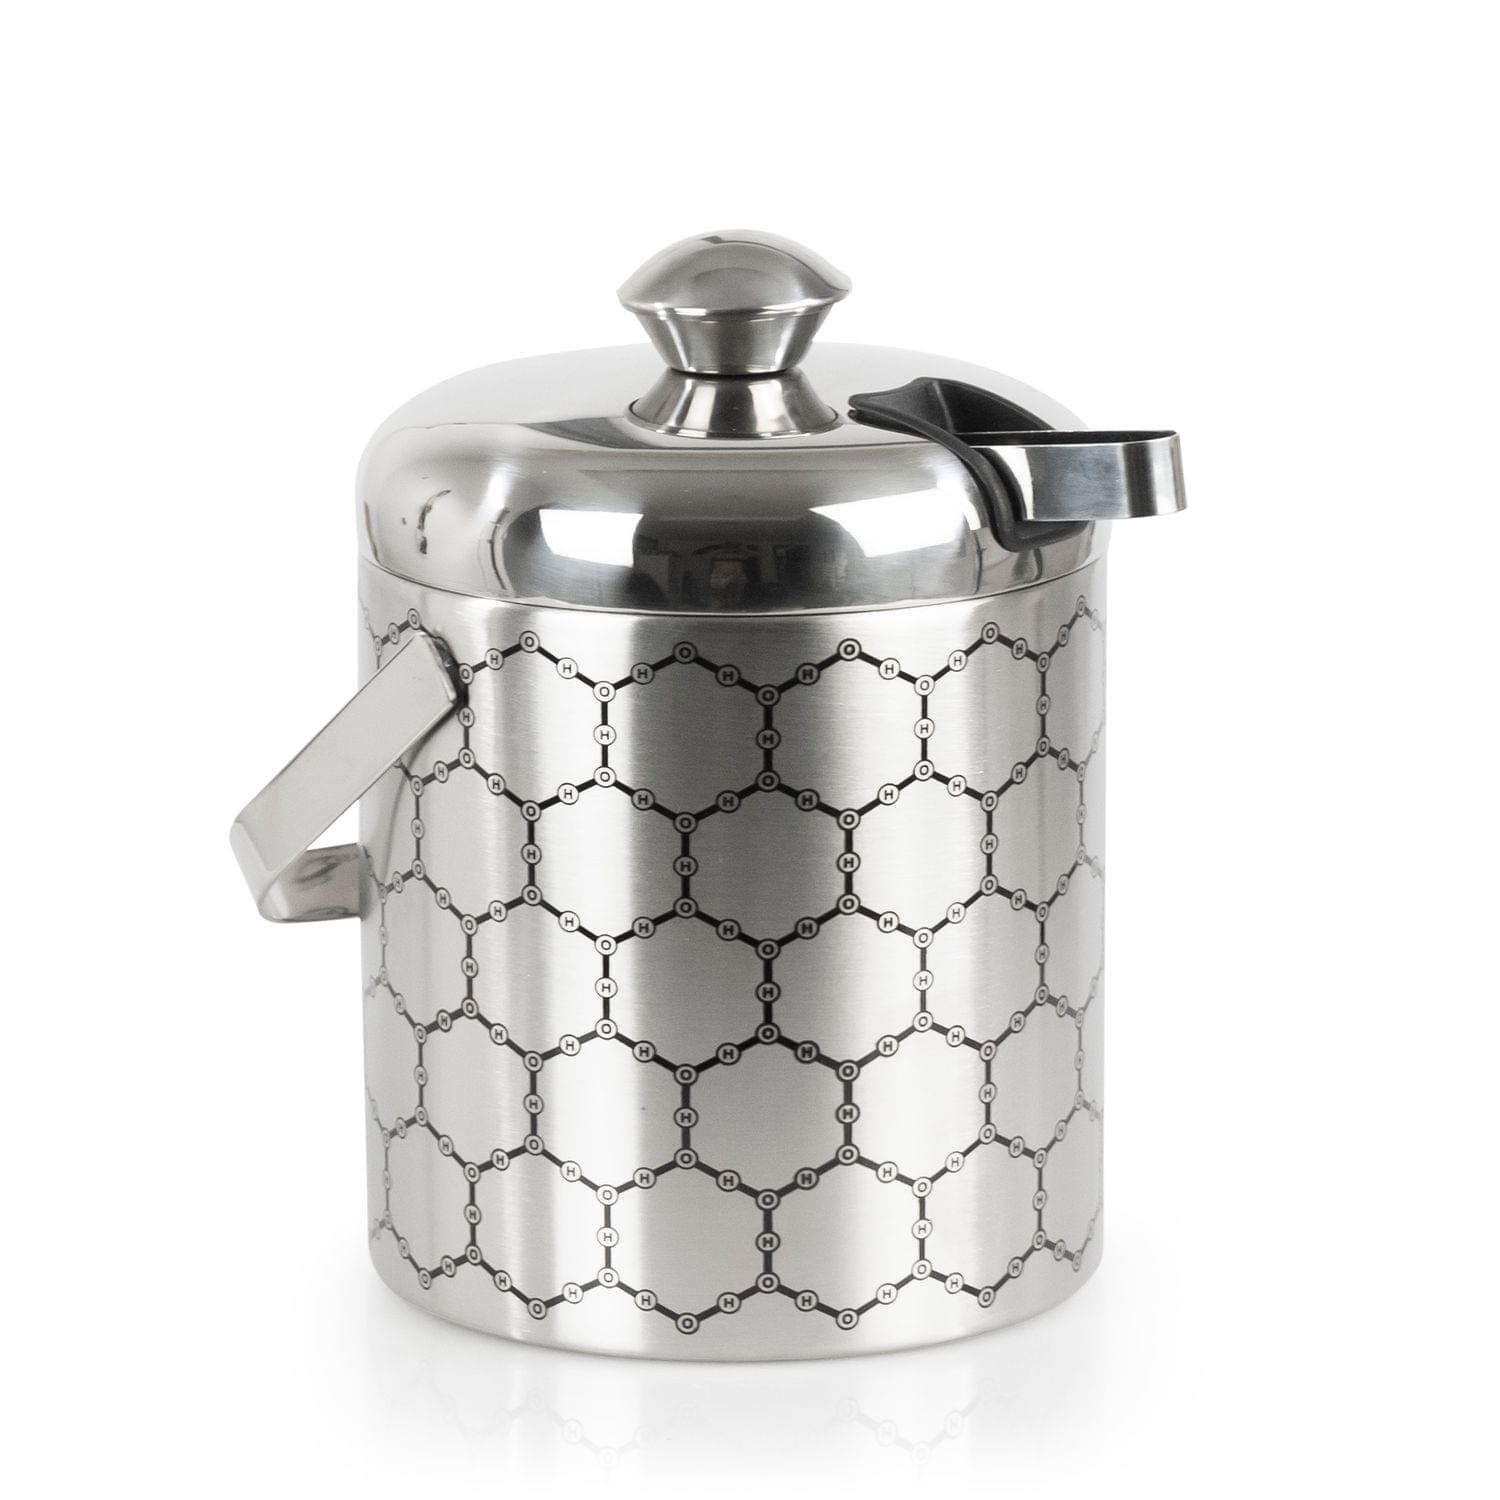 Stainless Steel Ice Bucket With Ice Molecule Pattern | Includes Set Of Ice Tongs